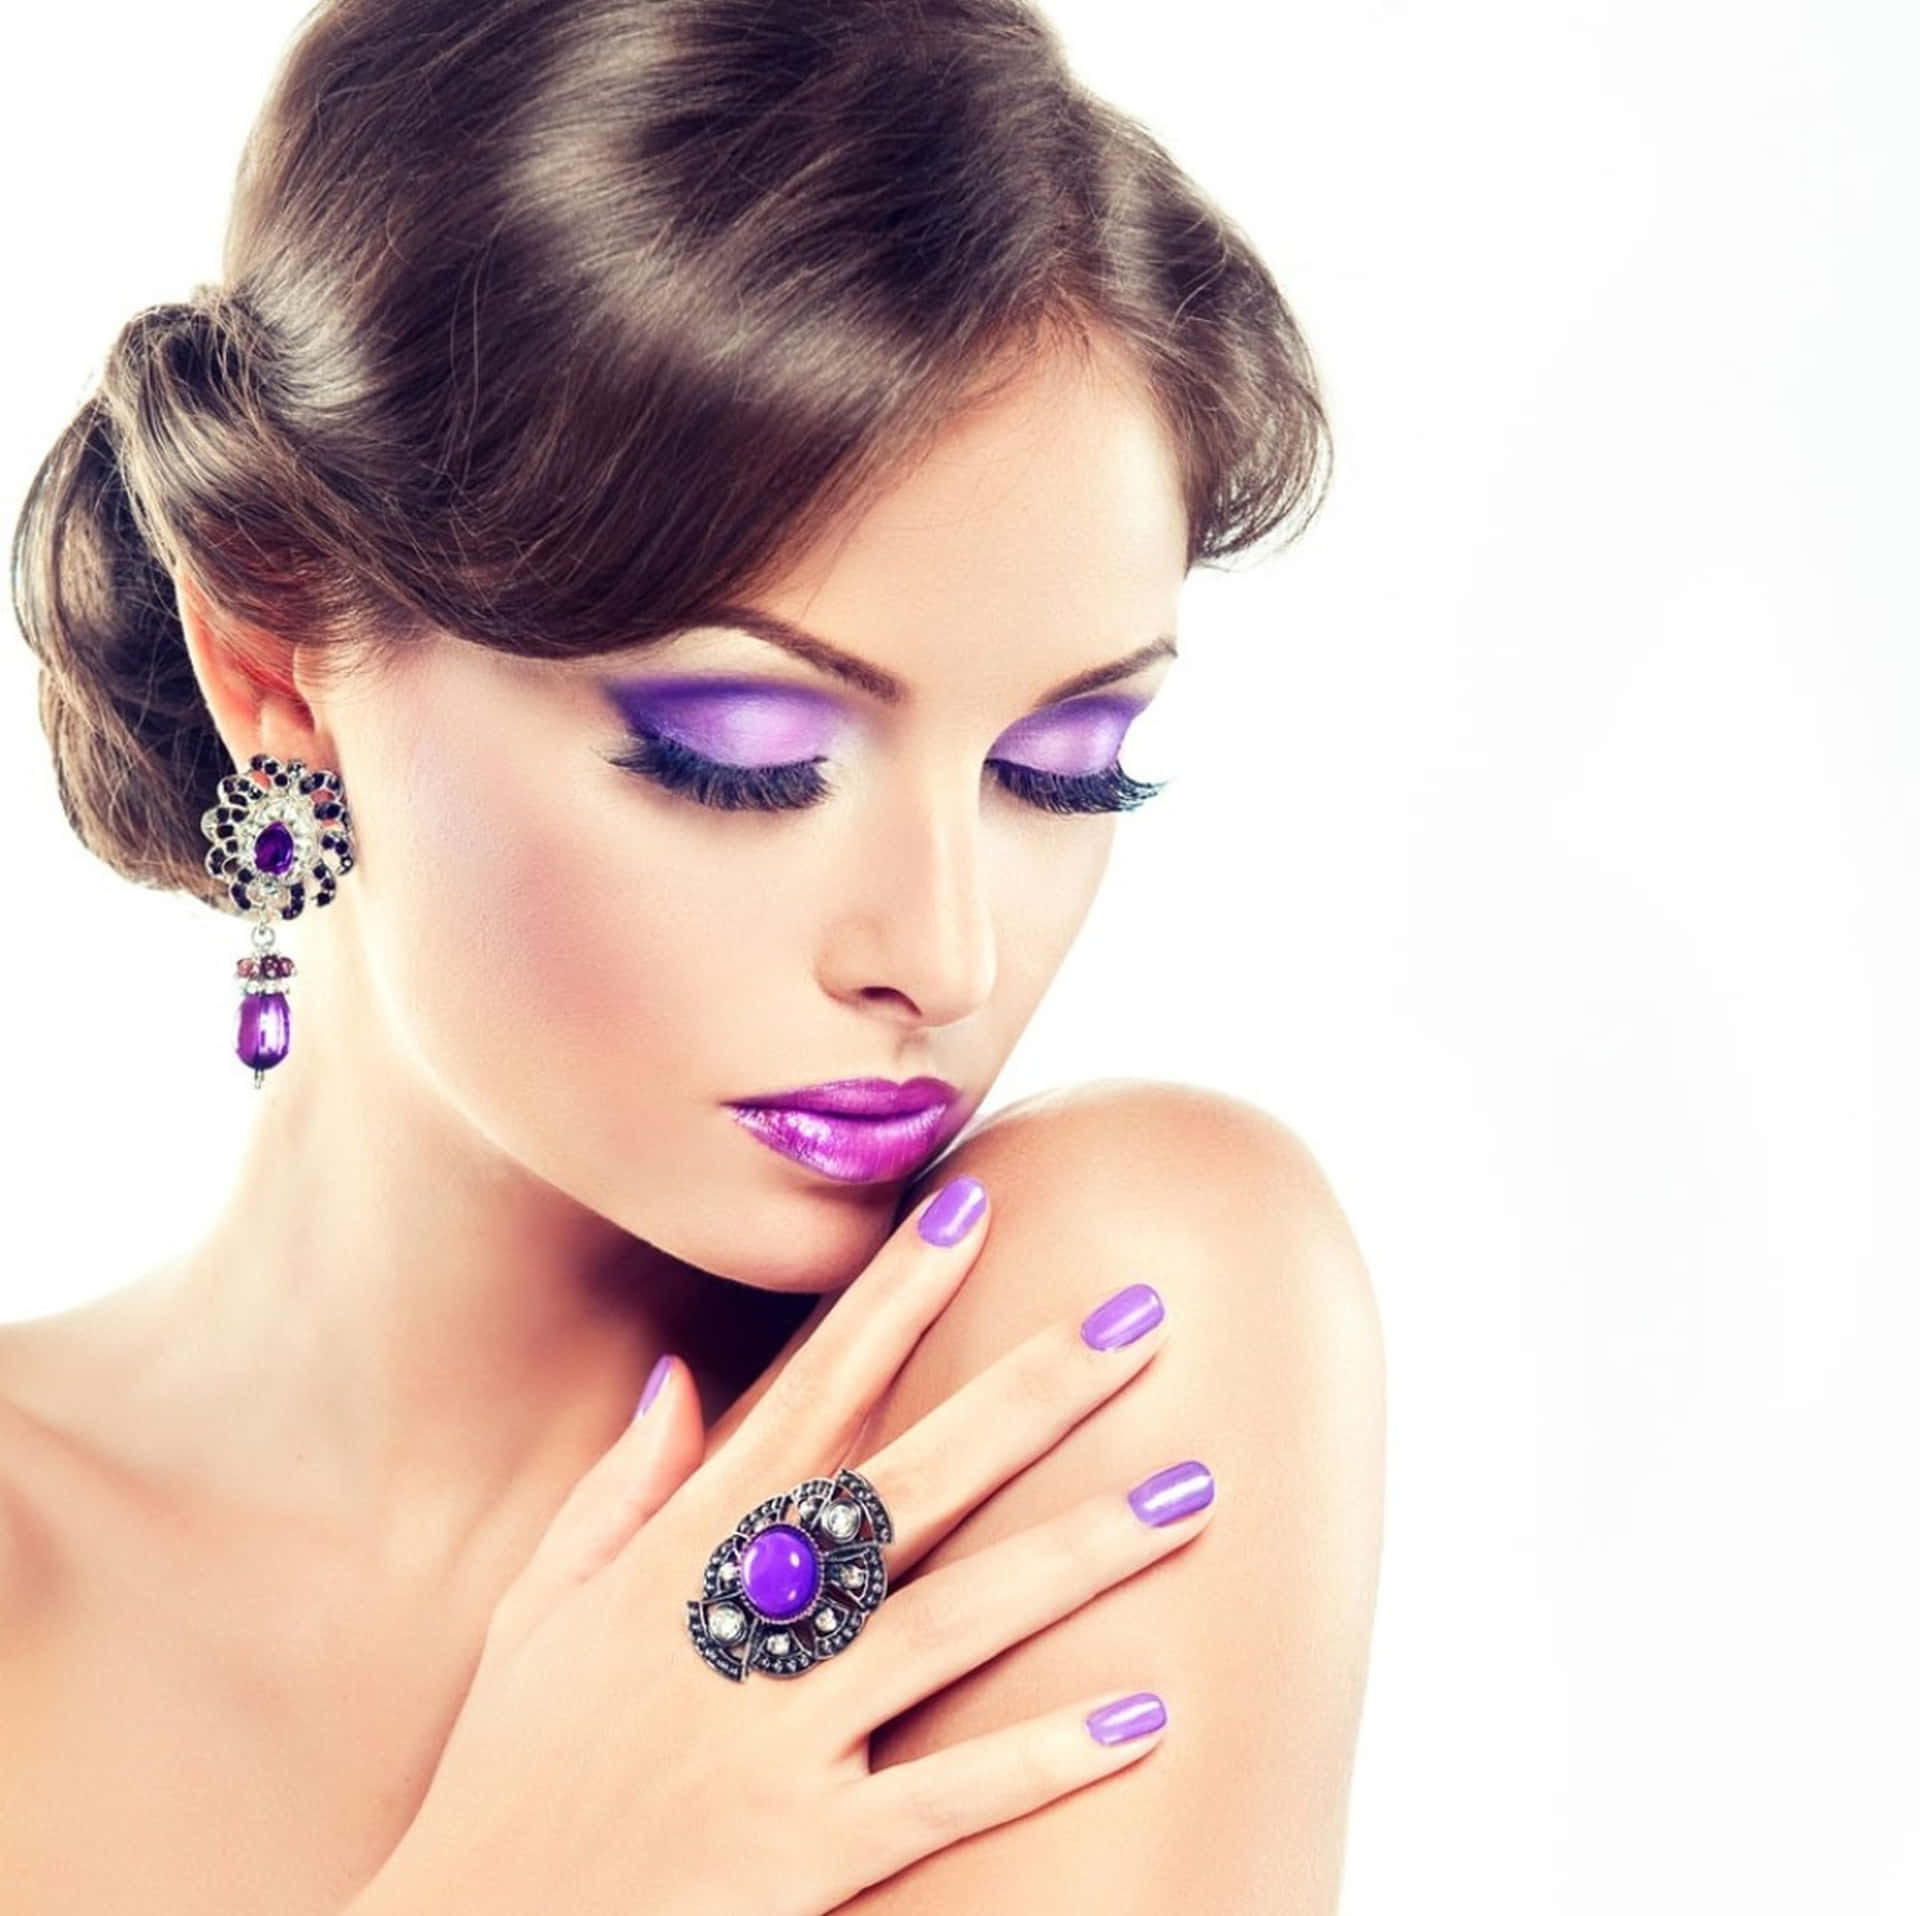 Look elegant and stylish with Purple Accessories Wallpaper